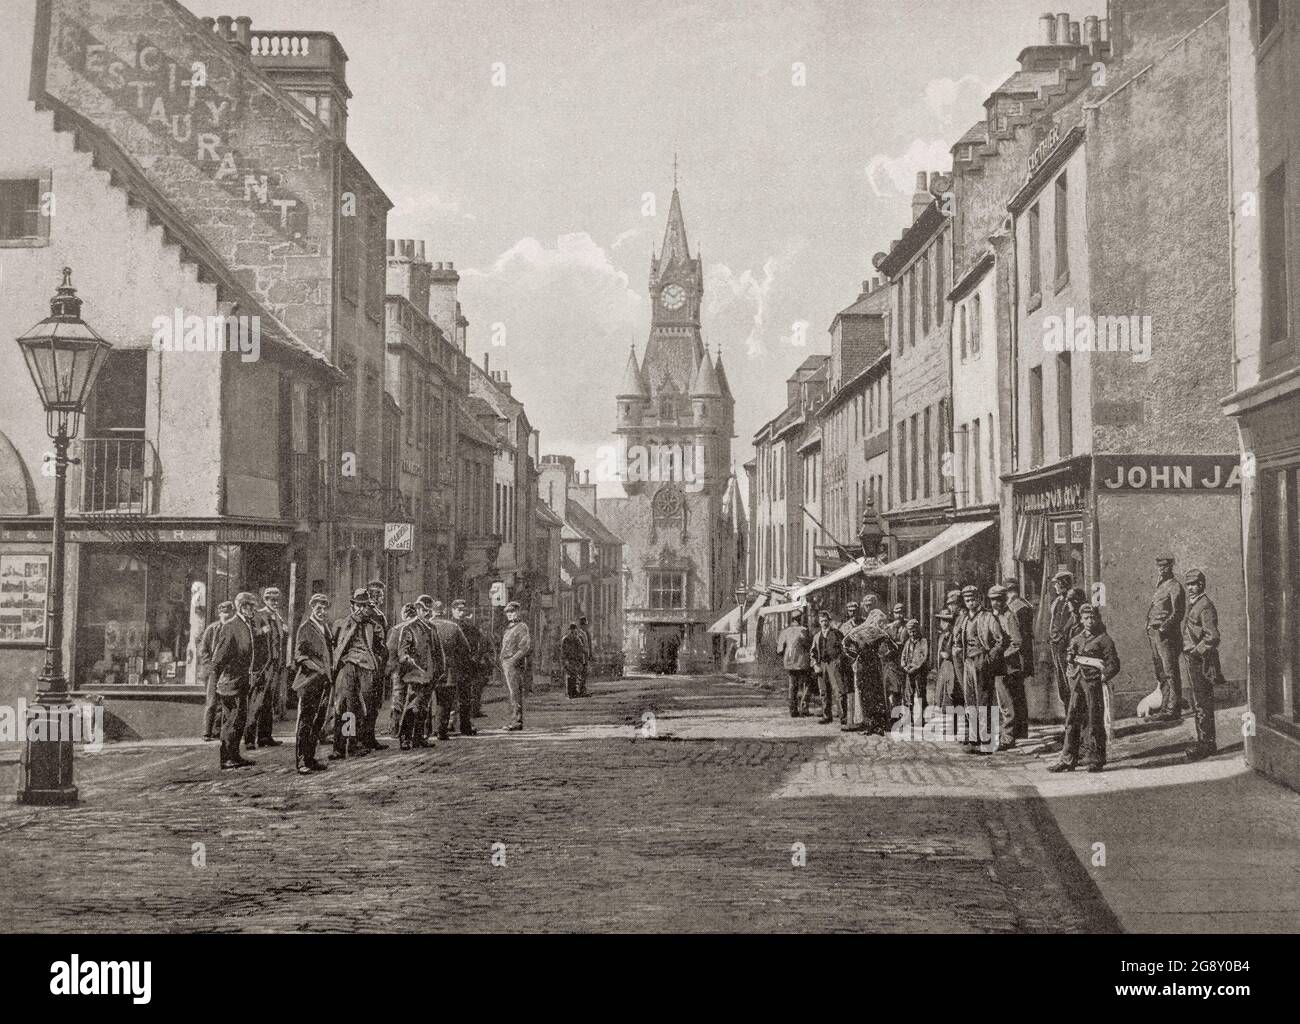 A late 19th century view of the High Street in Dunfermline, a town and former Royal Burgh in Fife, Scotland. At the end of the crowded street is Dunfermline City Chambers, designed by James Campbell Walker in the French Gothic style, and completed in May 1879. It was built to replace the old town house after rapid industrial growth in the local area. Stock Photo